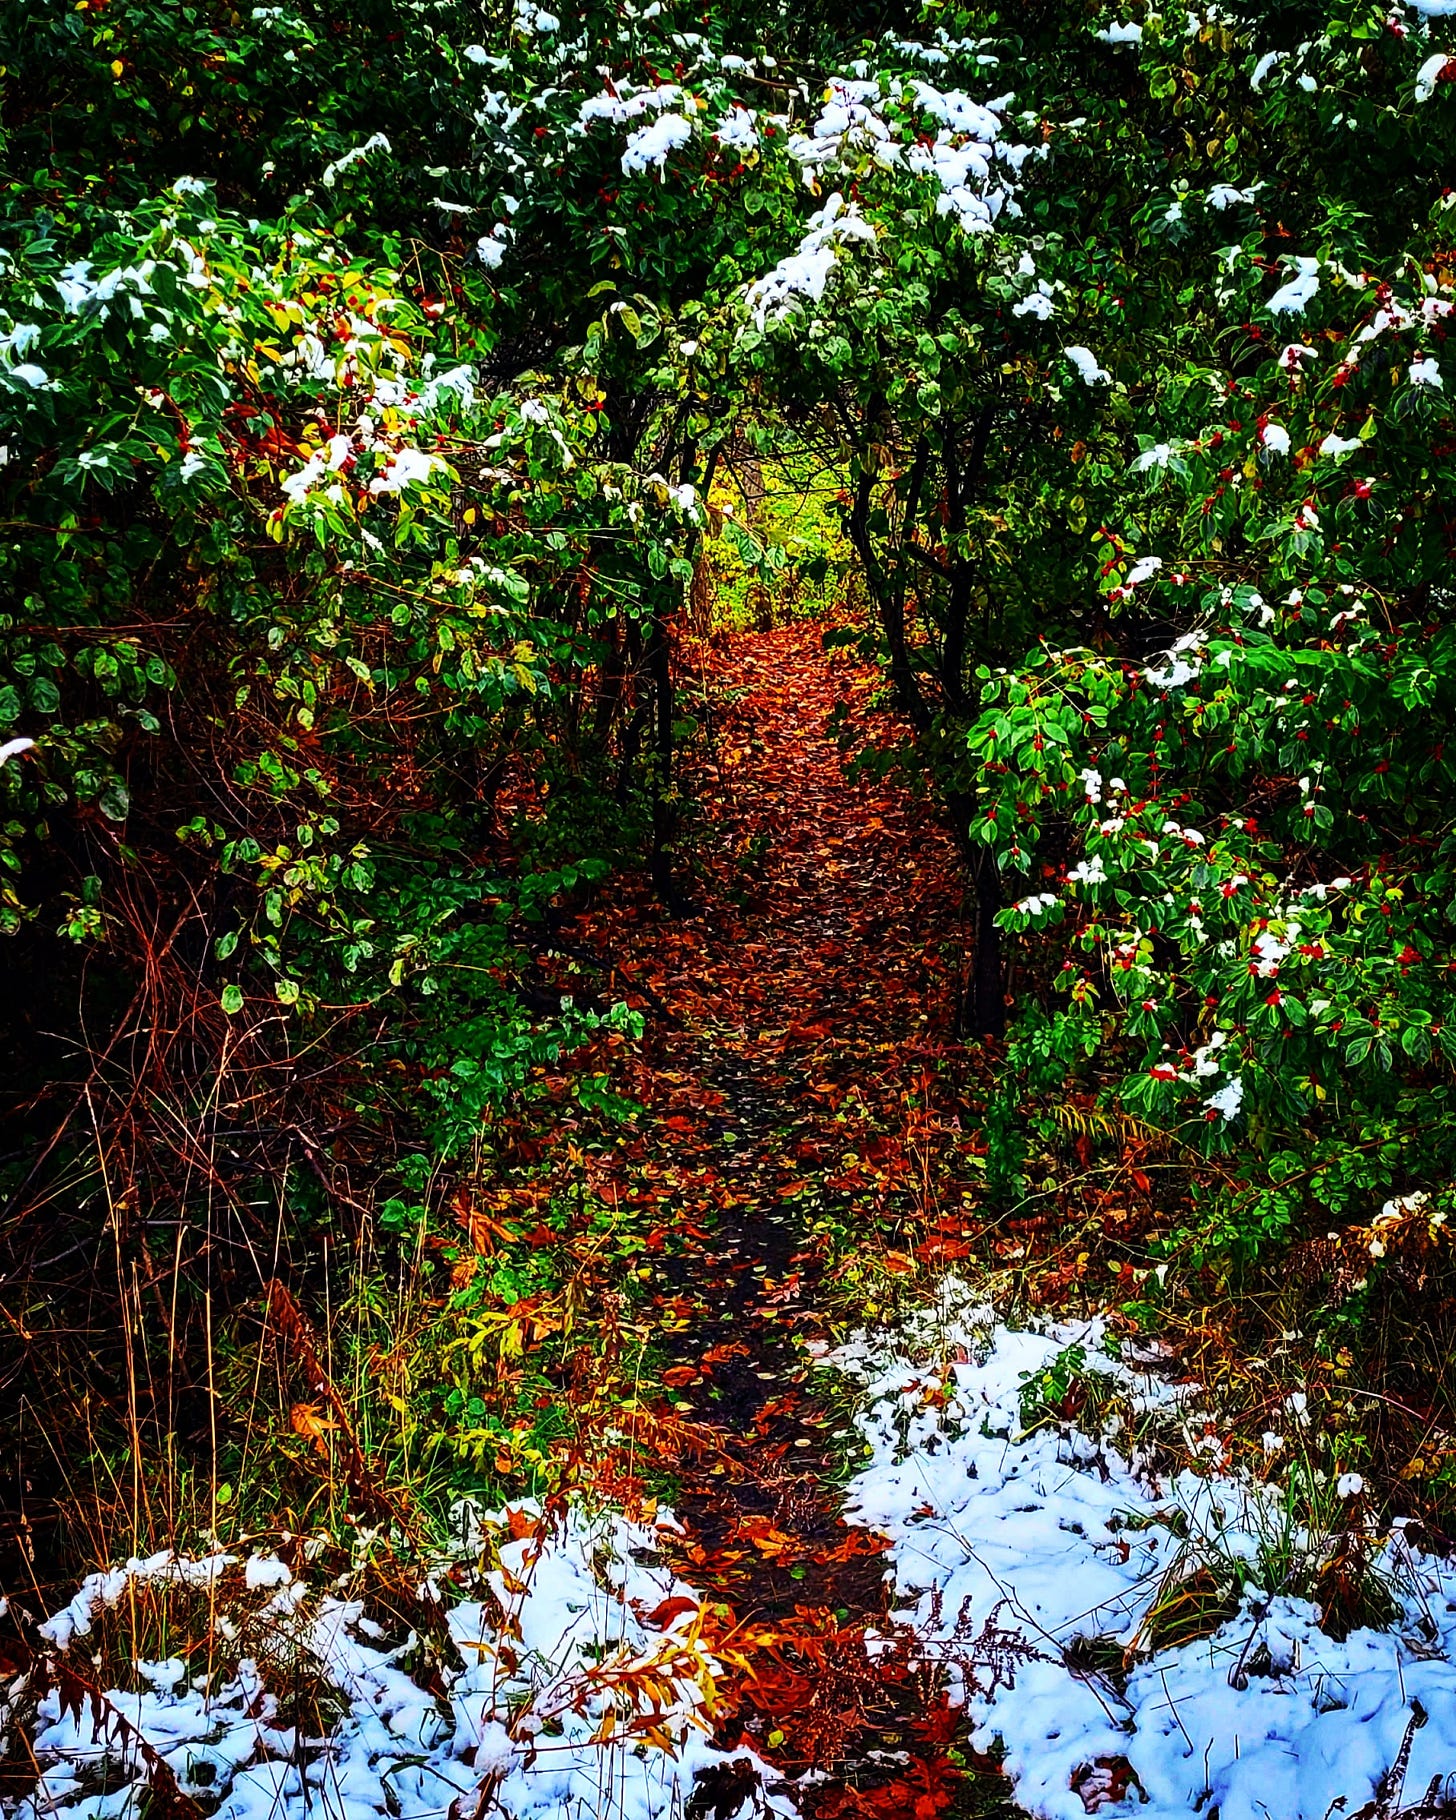 Leaves and Snow on the Path - Image by Shawn R. Metivier, 2021